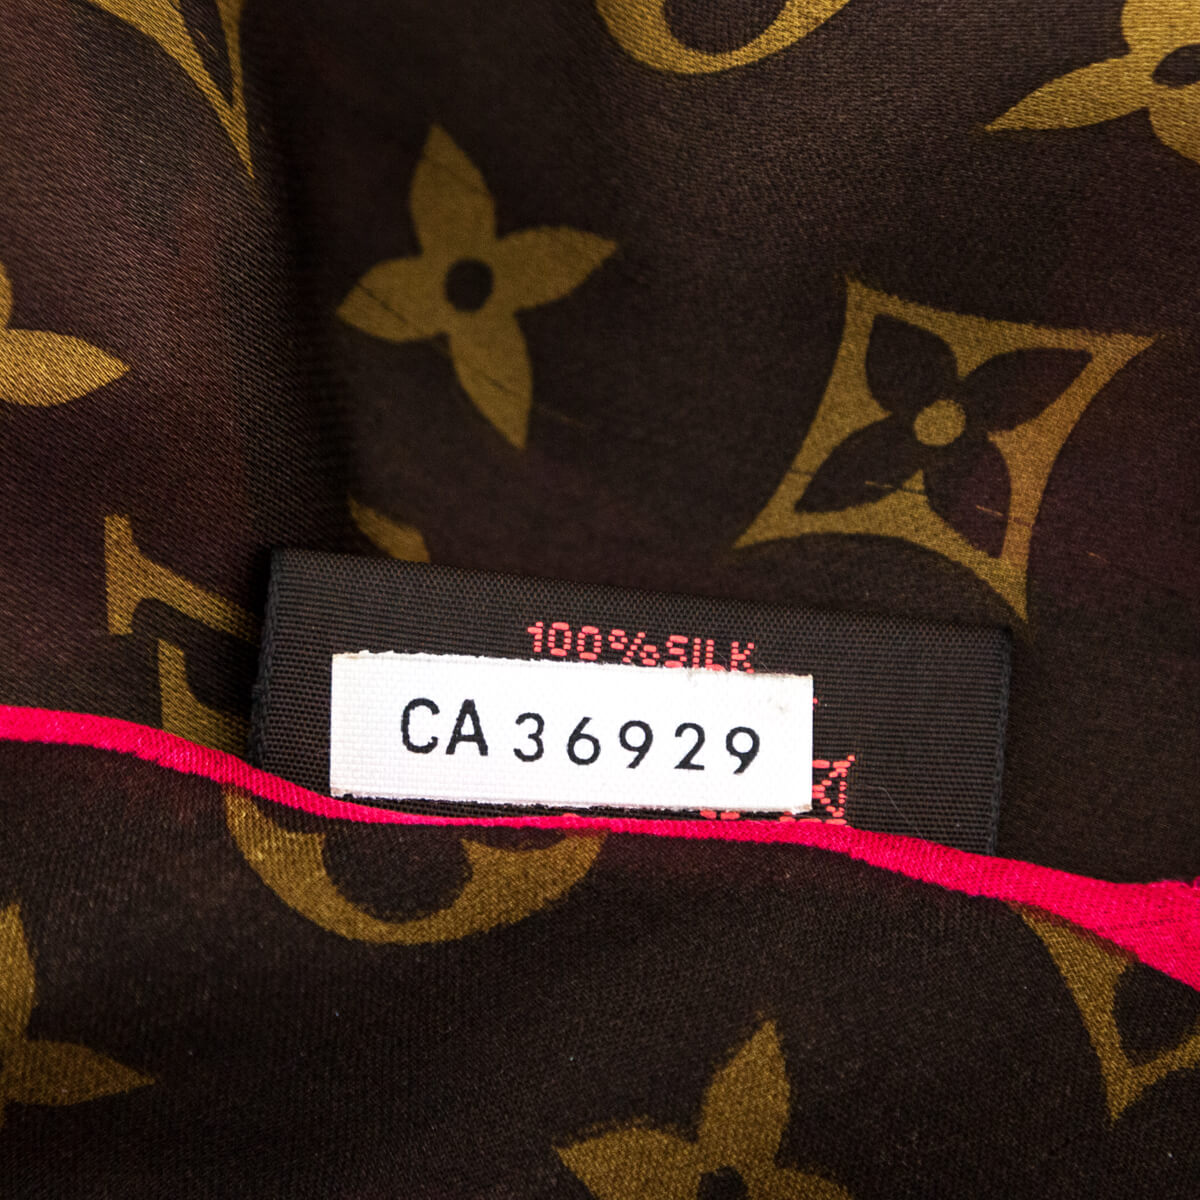 LOUIS VUITTON STEPHEN SPROUSSE MONOGRAM PINK BROWN SHEER SHAWL STOLE SCARF  UNKNOWN AUTHENTICITY